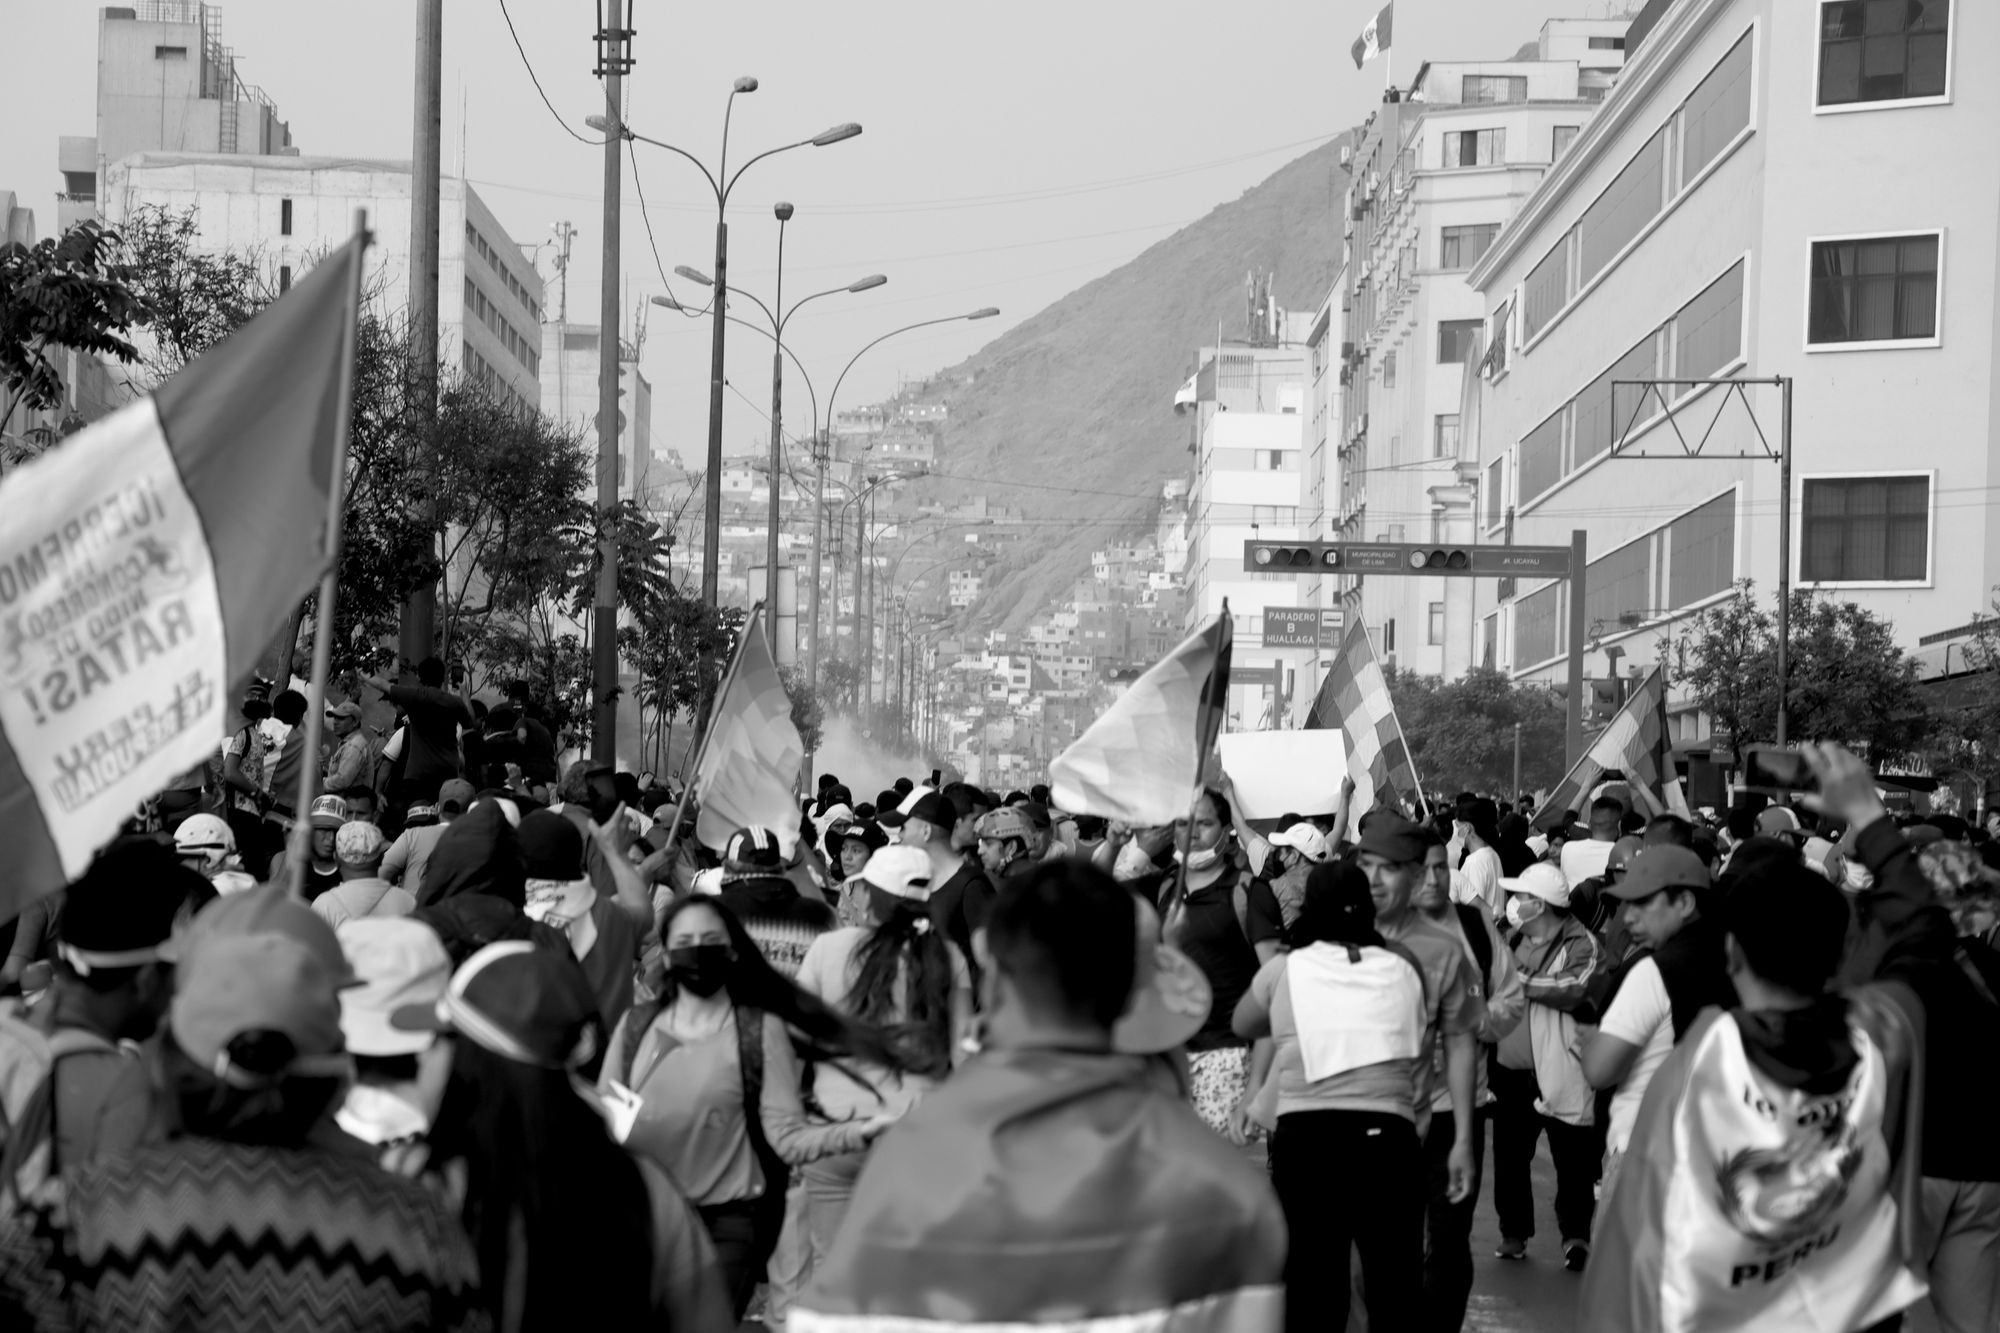 The phenomenon of "terruqueo" in Peru: stigmatization and racism in the spike of protests against the government